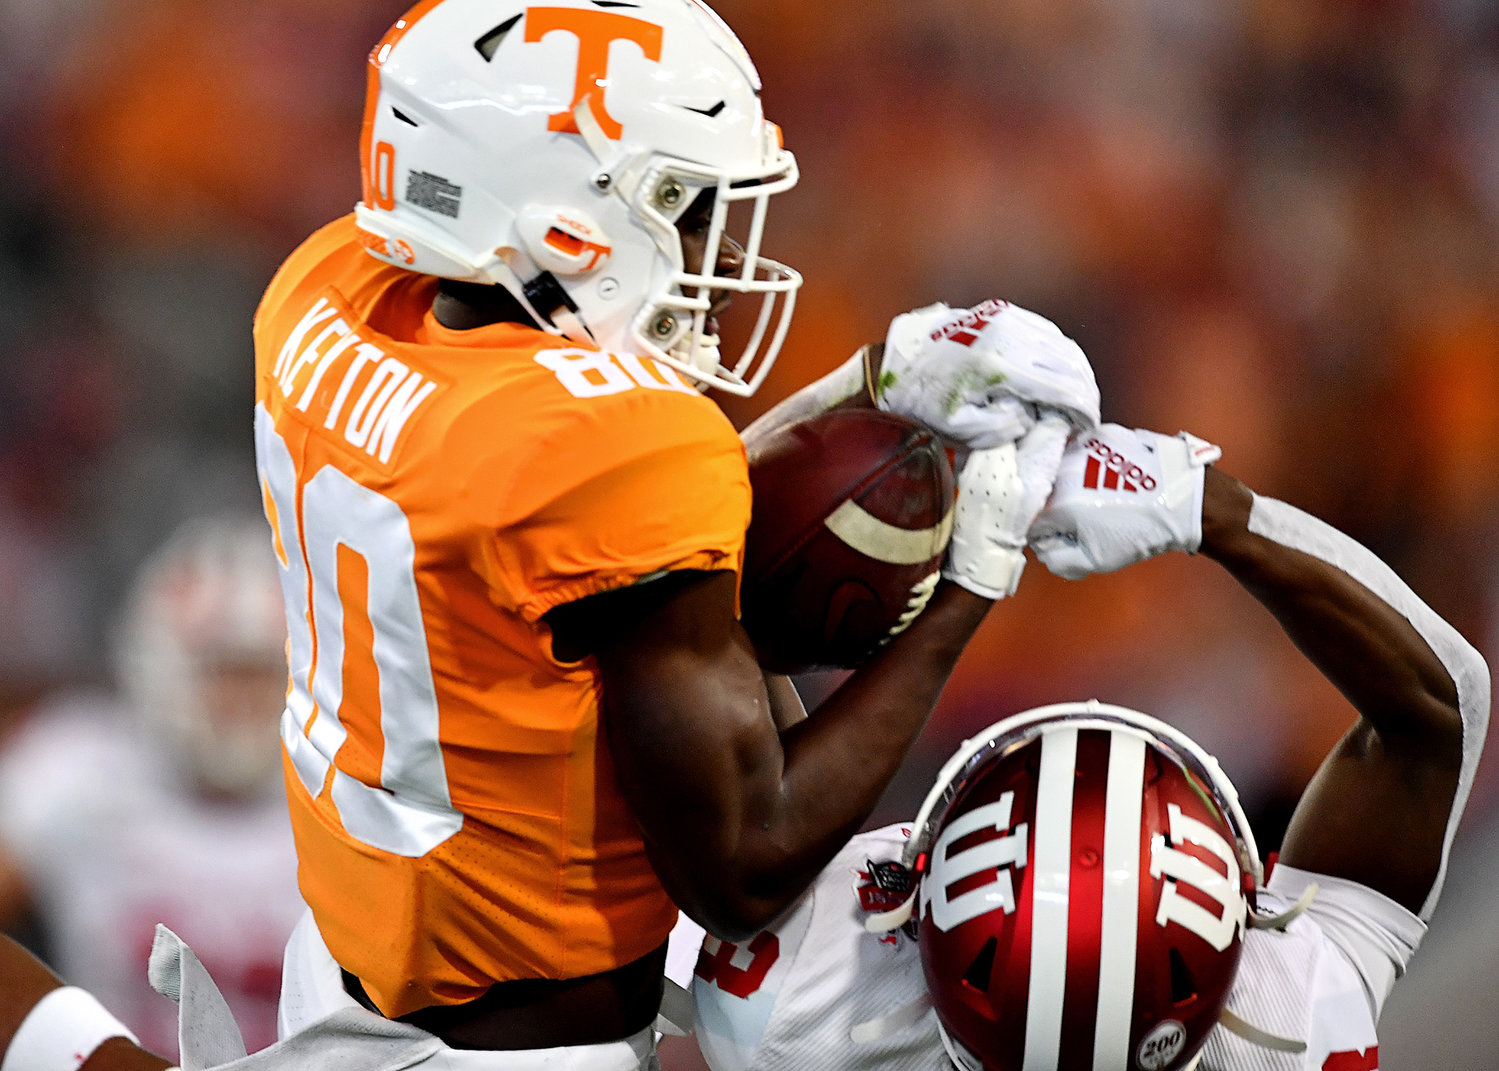 Tennessee Volunteers wide receiver Ramel Keyton (80) battles for the ball and comes up the winner during the first half of the Gator Bowl NCAA football game against the Indiana Hoosiers Thursday, January 2, 2020, at TIAA Bank Field in Jacksonville, Fla.